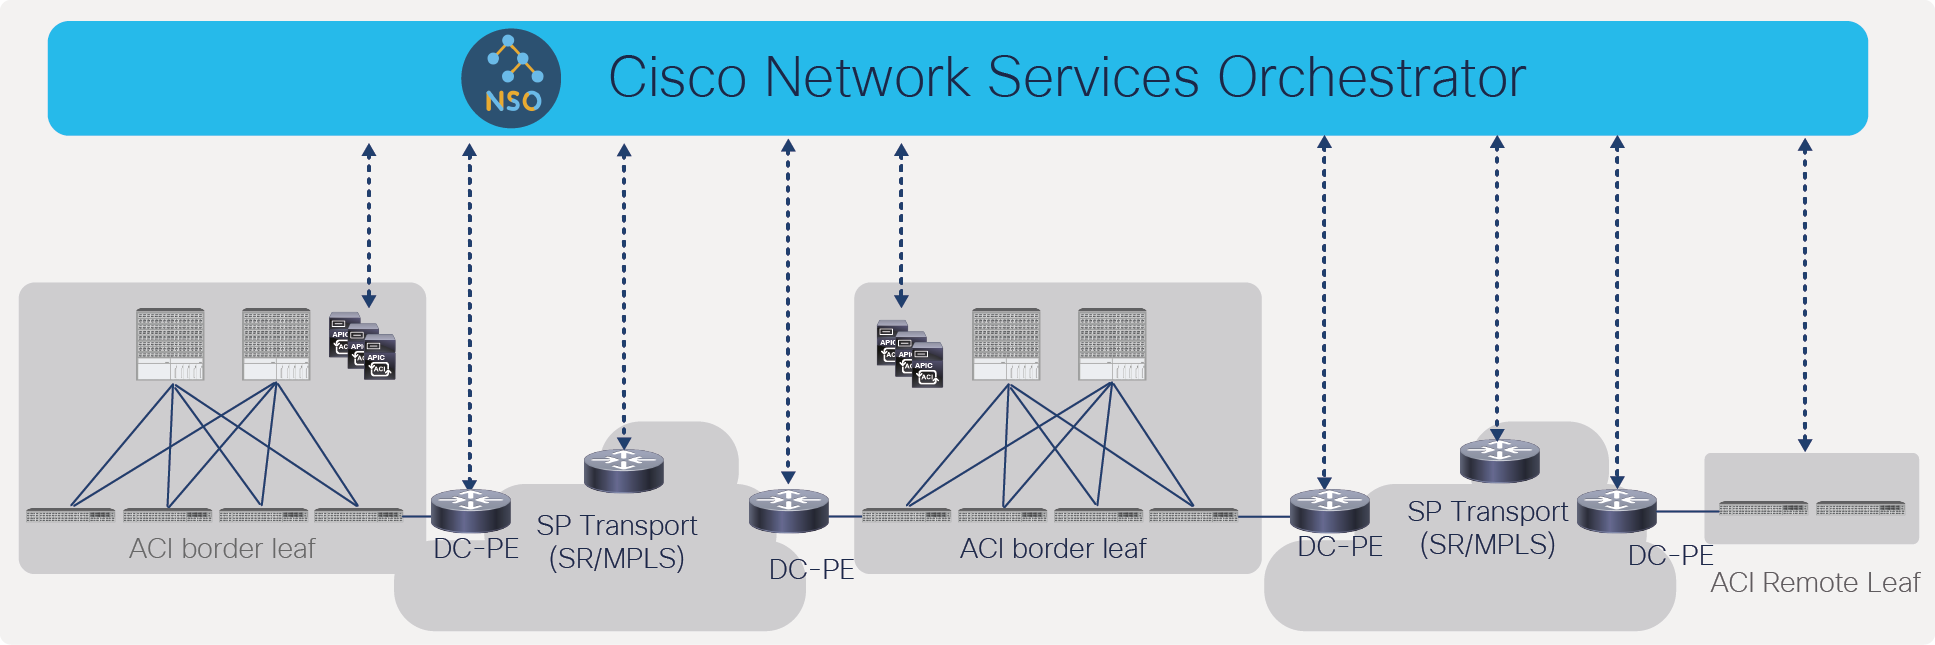 Cross-domain orchestration from Cisco Network Services Orchestrator